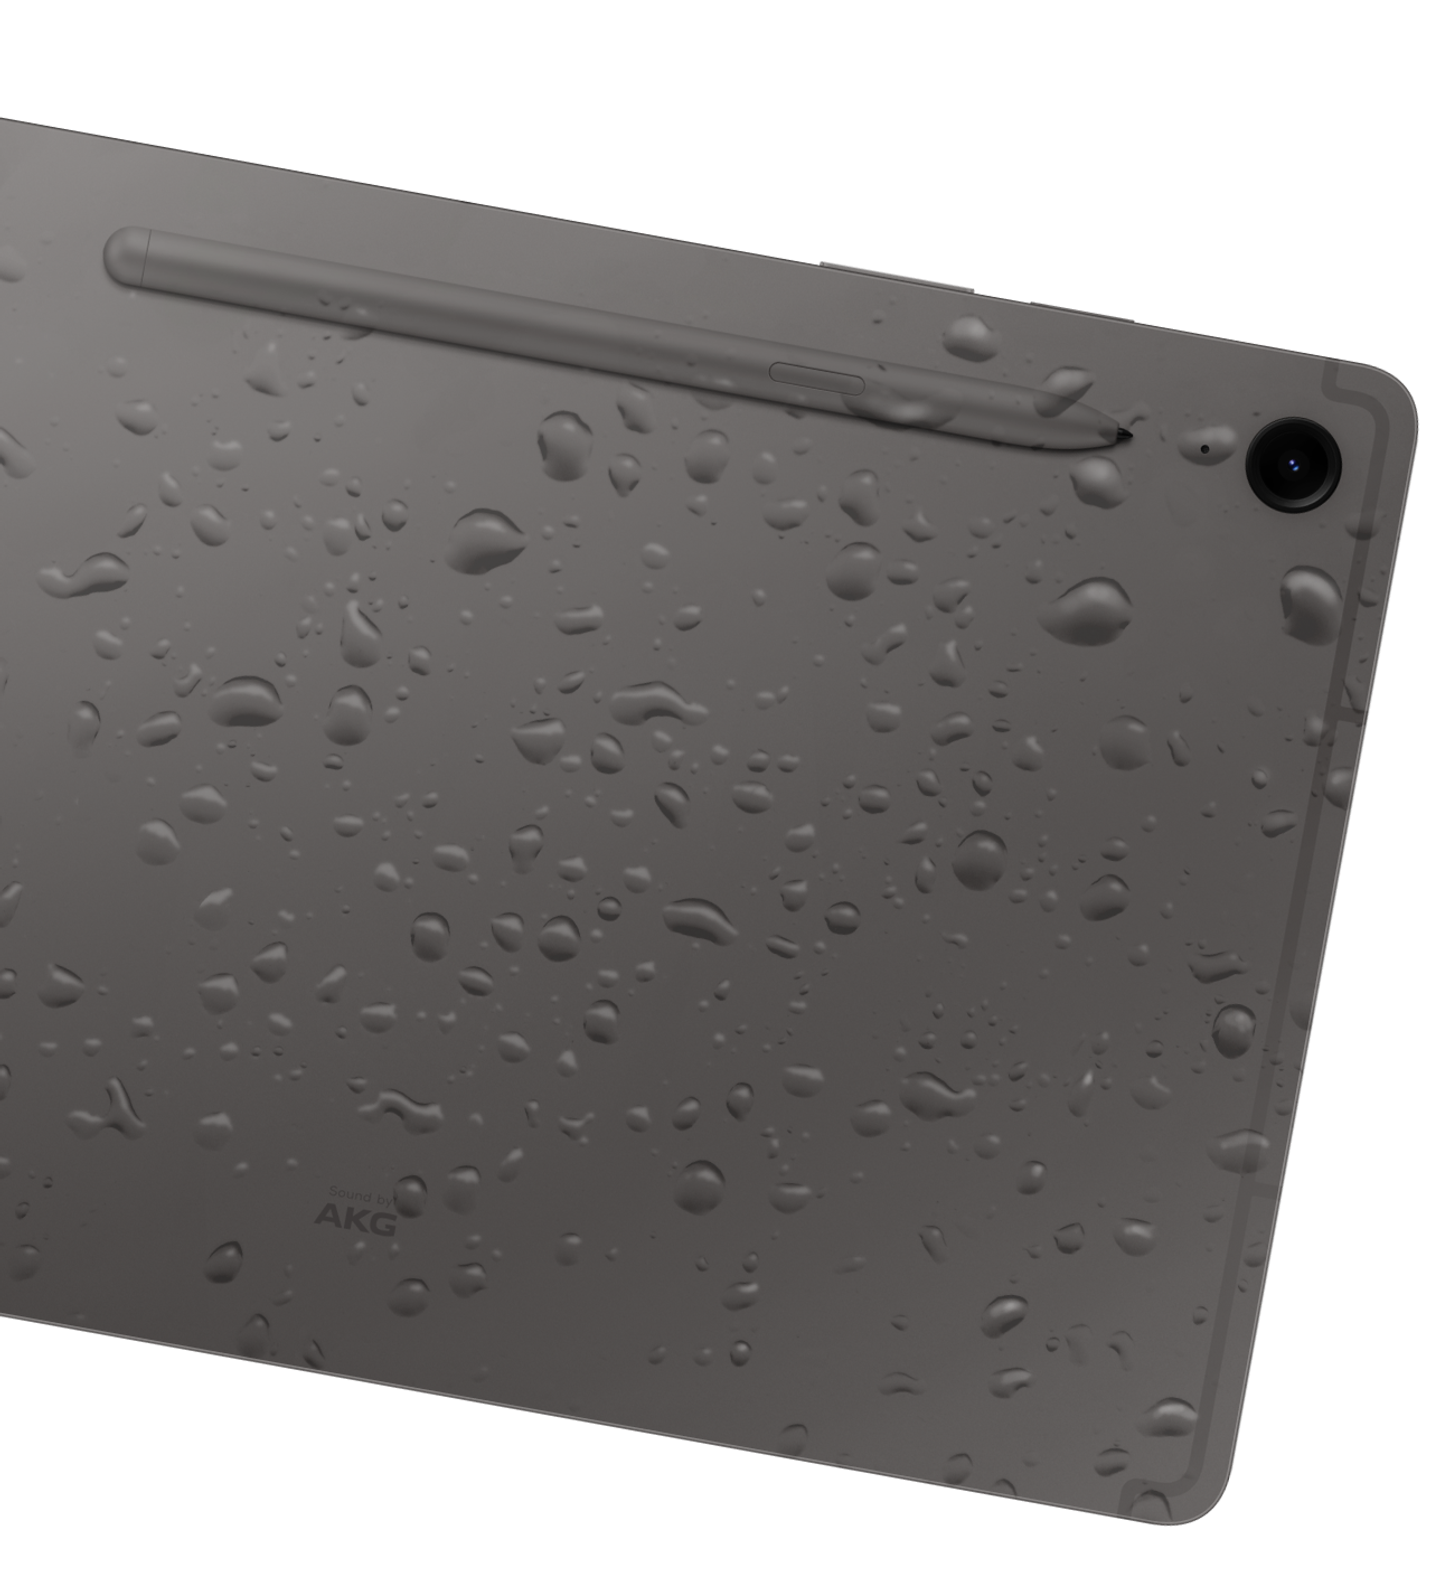 The back of Galaxy tablet covered in water droplets.